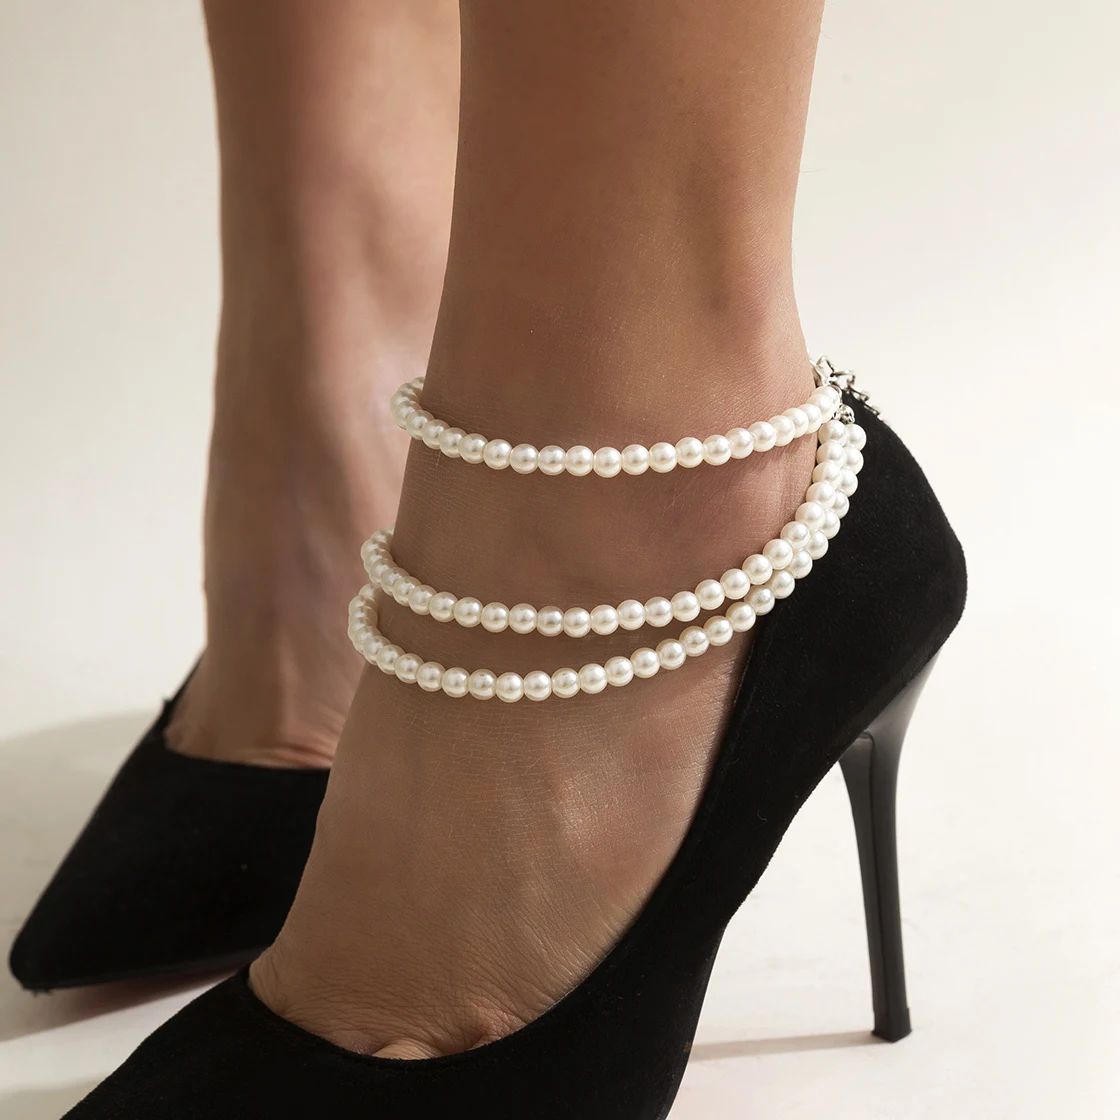 

Anklets Pearl Chain 1PC Multilayer Tassel Women Lady High Heel Ankle Bracelet Barefoot Sandals Prom Foot Party Jewelry